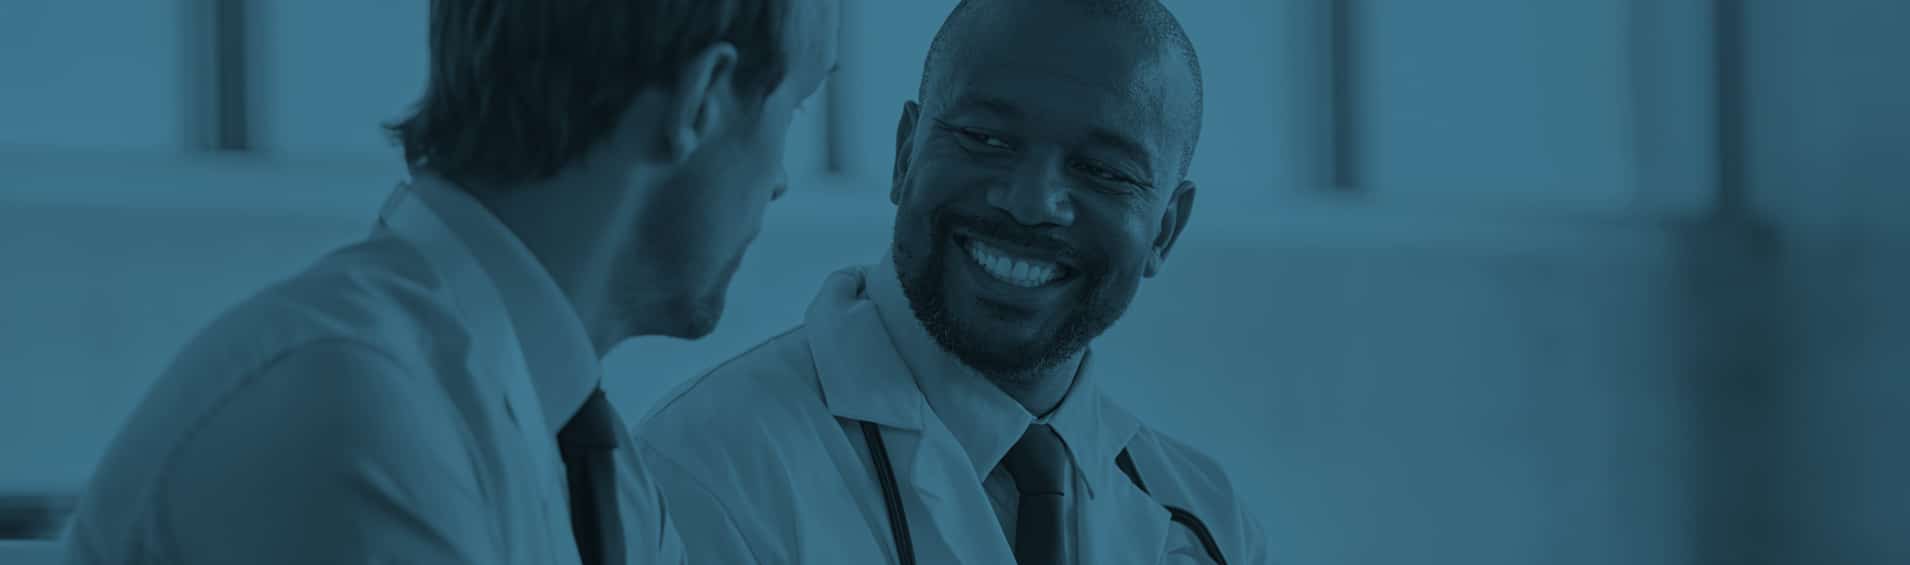 HSG Advisors_Physicians in employed networks understand the wide-ranging benefits of collaborating with and/or supervising Advanced Practice Providers (APPs).